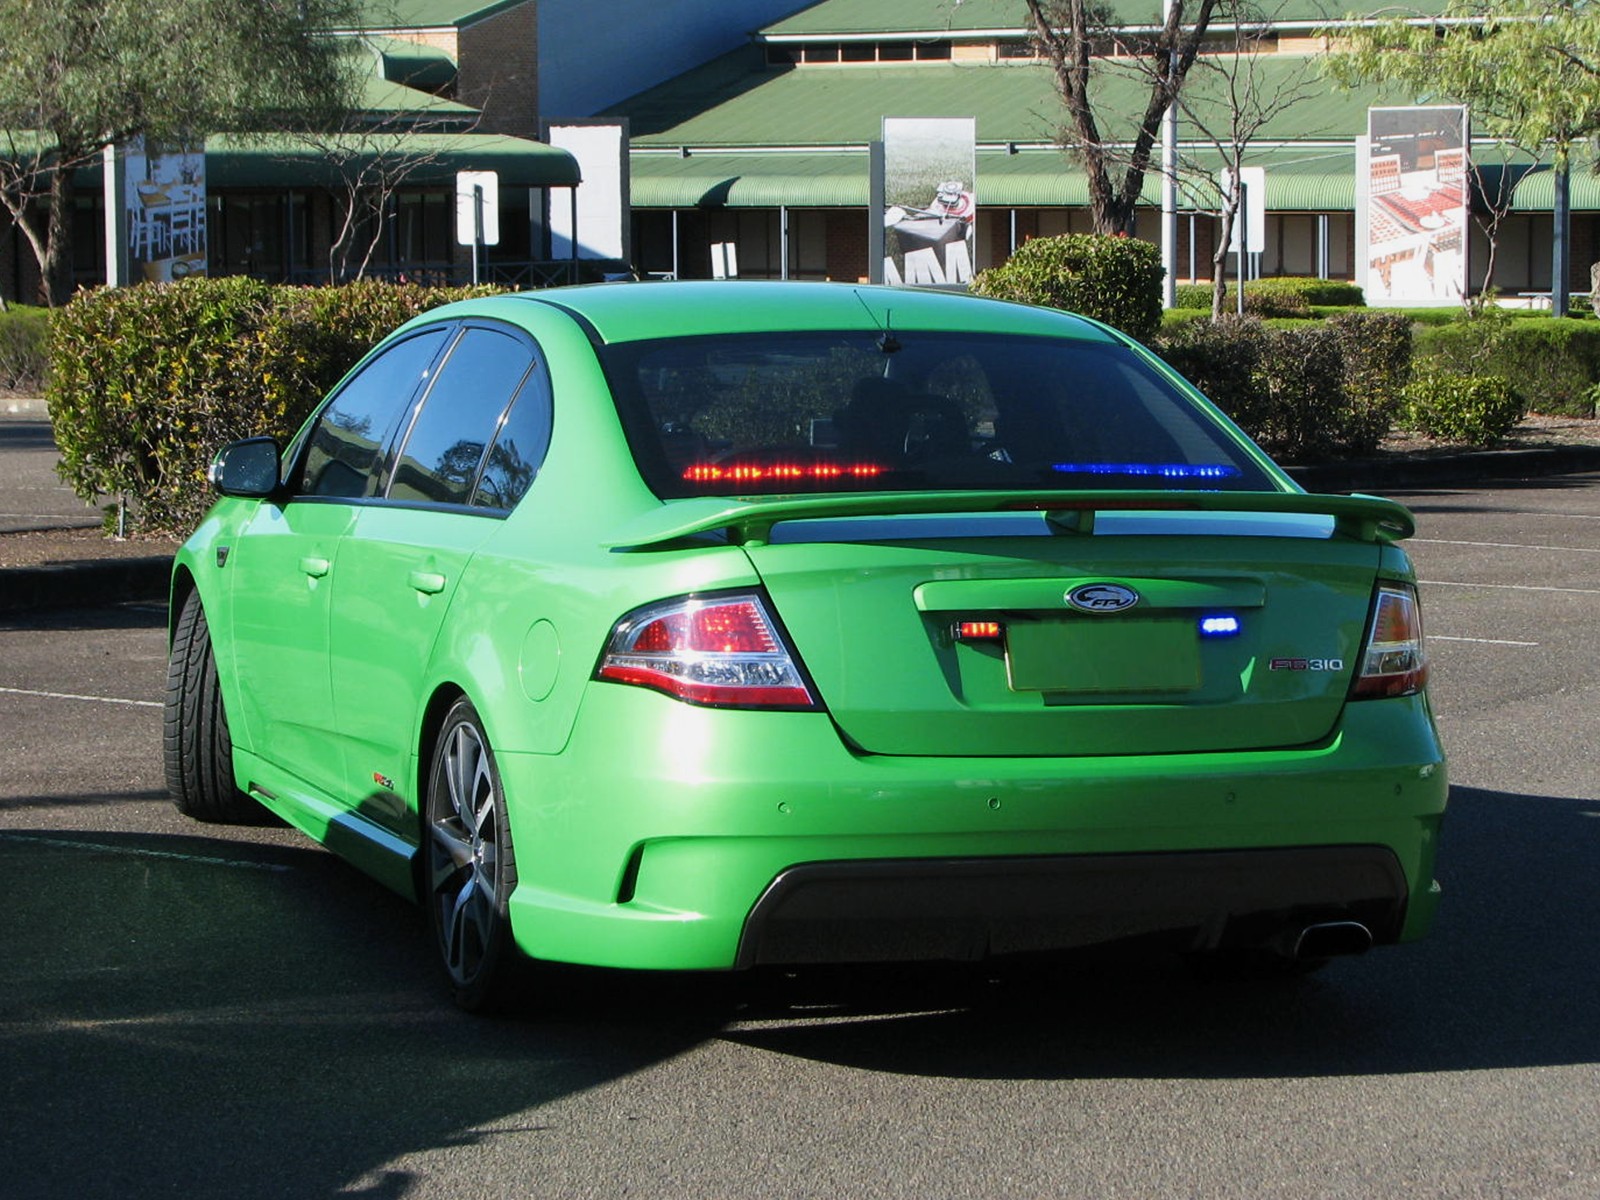 a green car with its back lights on in a parking lot